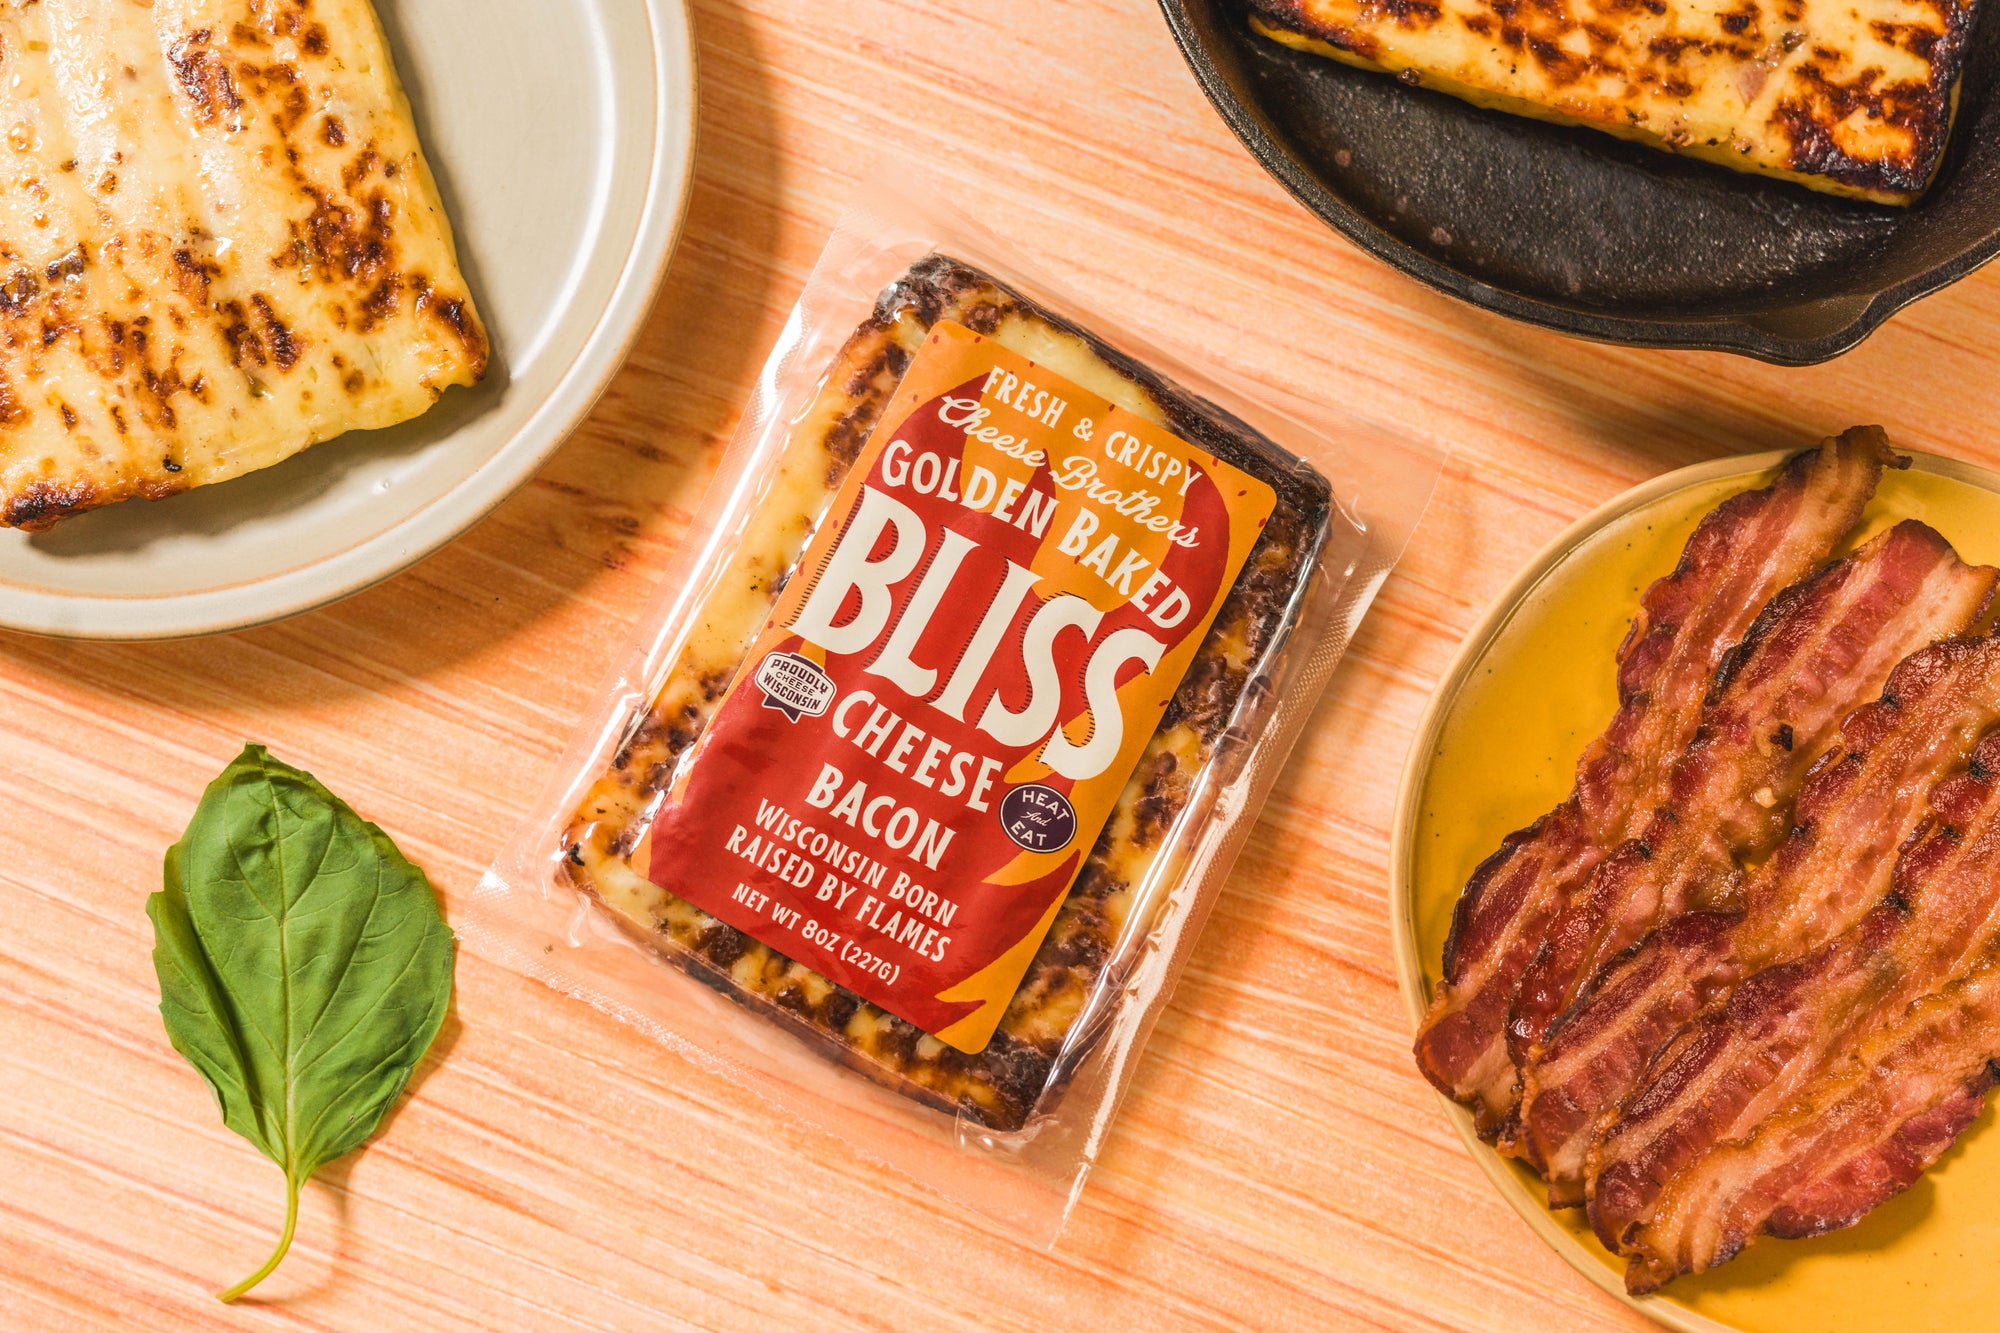 Bacon Golden Baked Bliss Cheese *Ships Week of Monday, May 20*